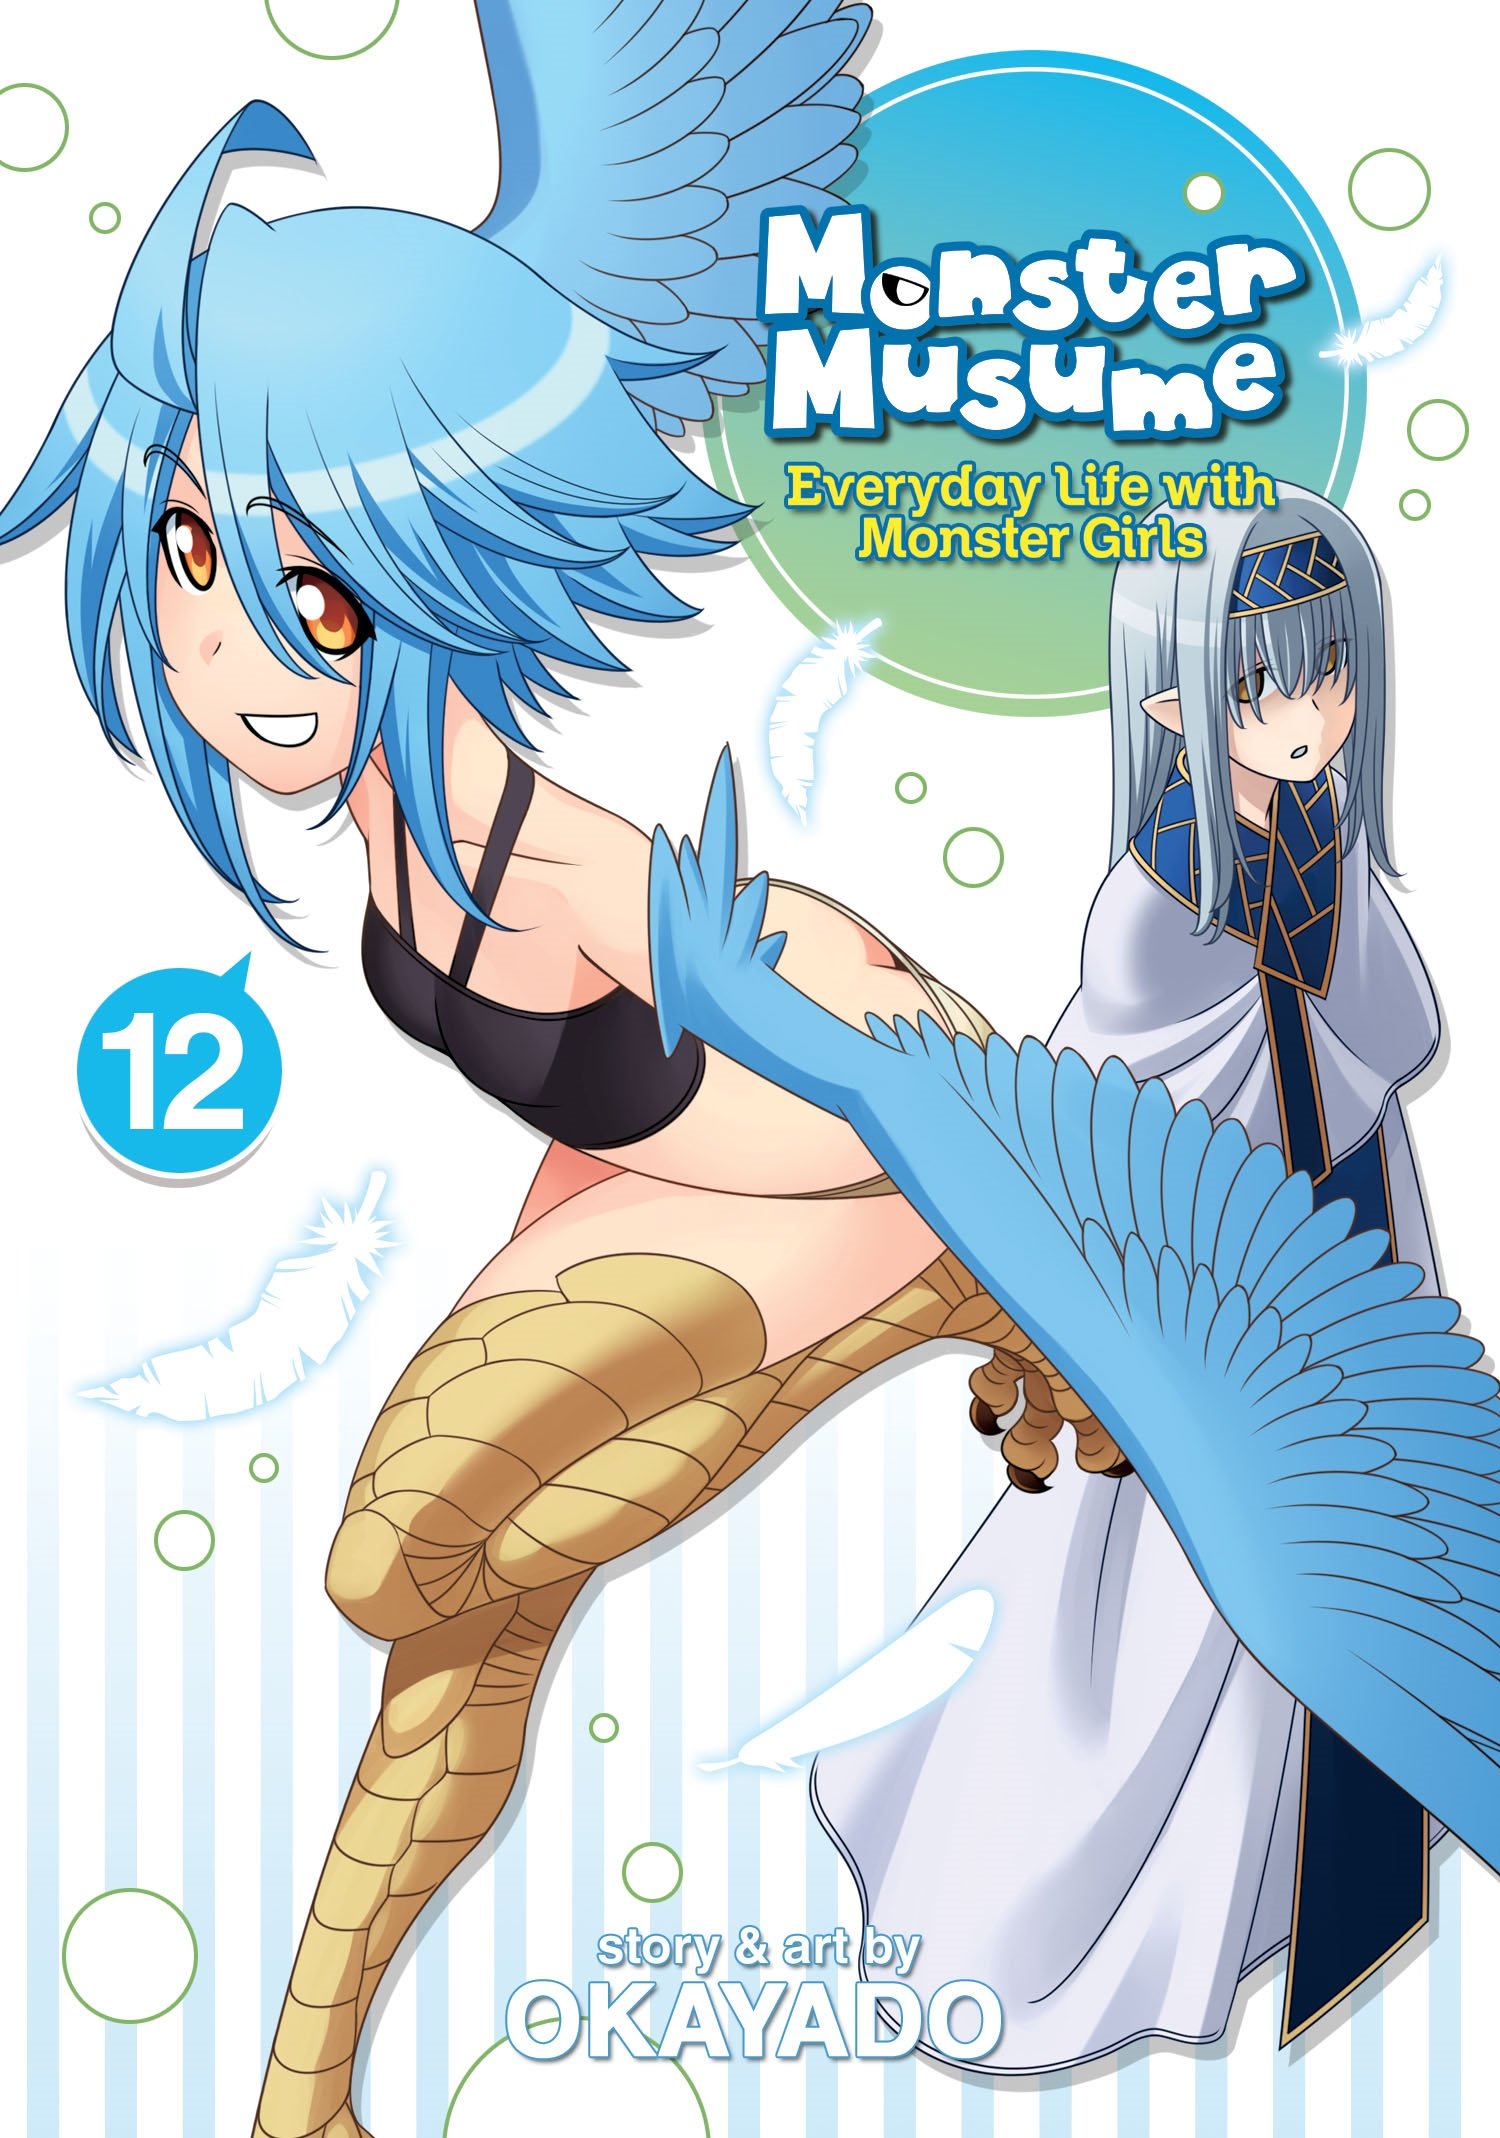 Monster Musume Season 2 Release Date,Plot,Trailer and Everything You need to Know